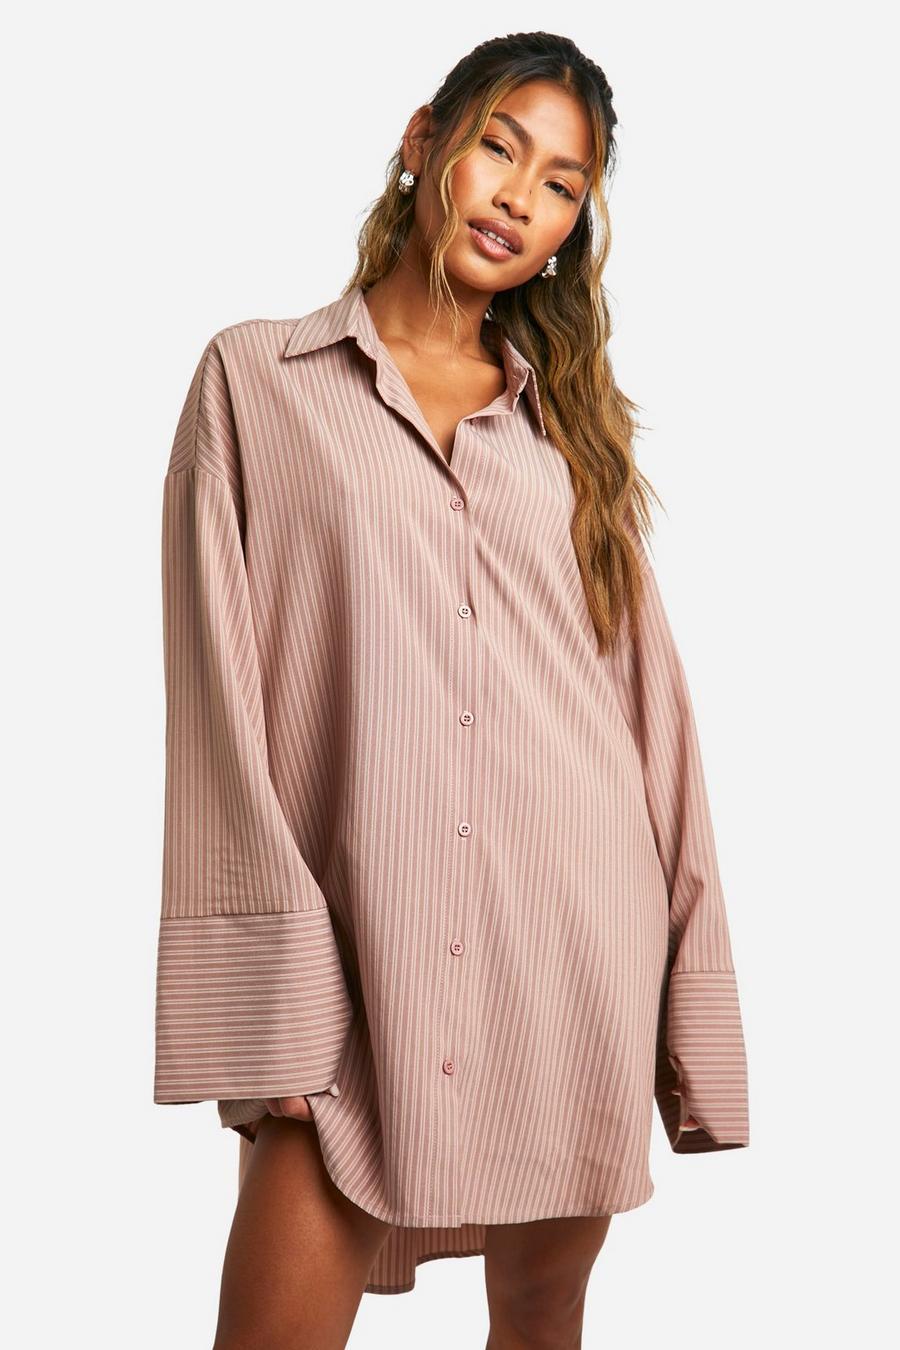 Robe chemise rayée à manches larges, Rust